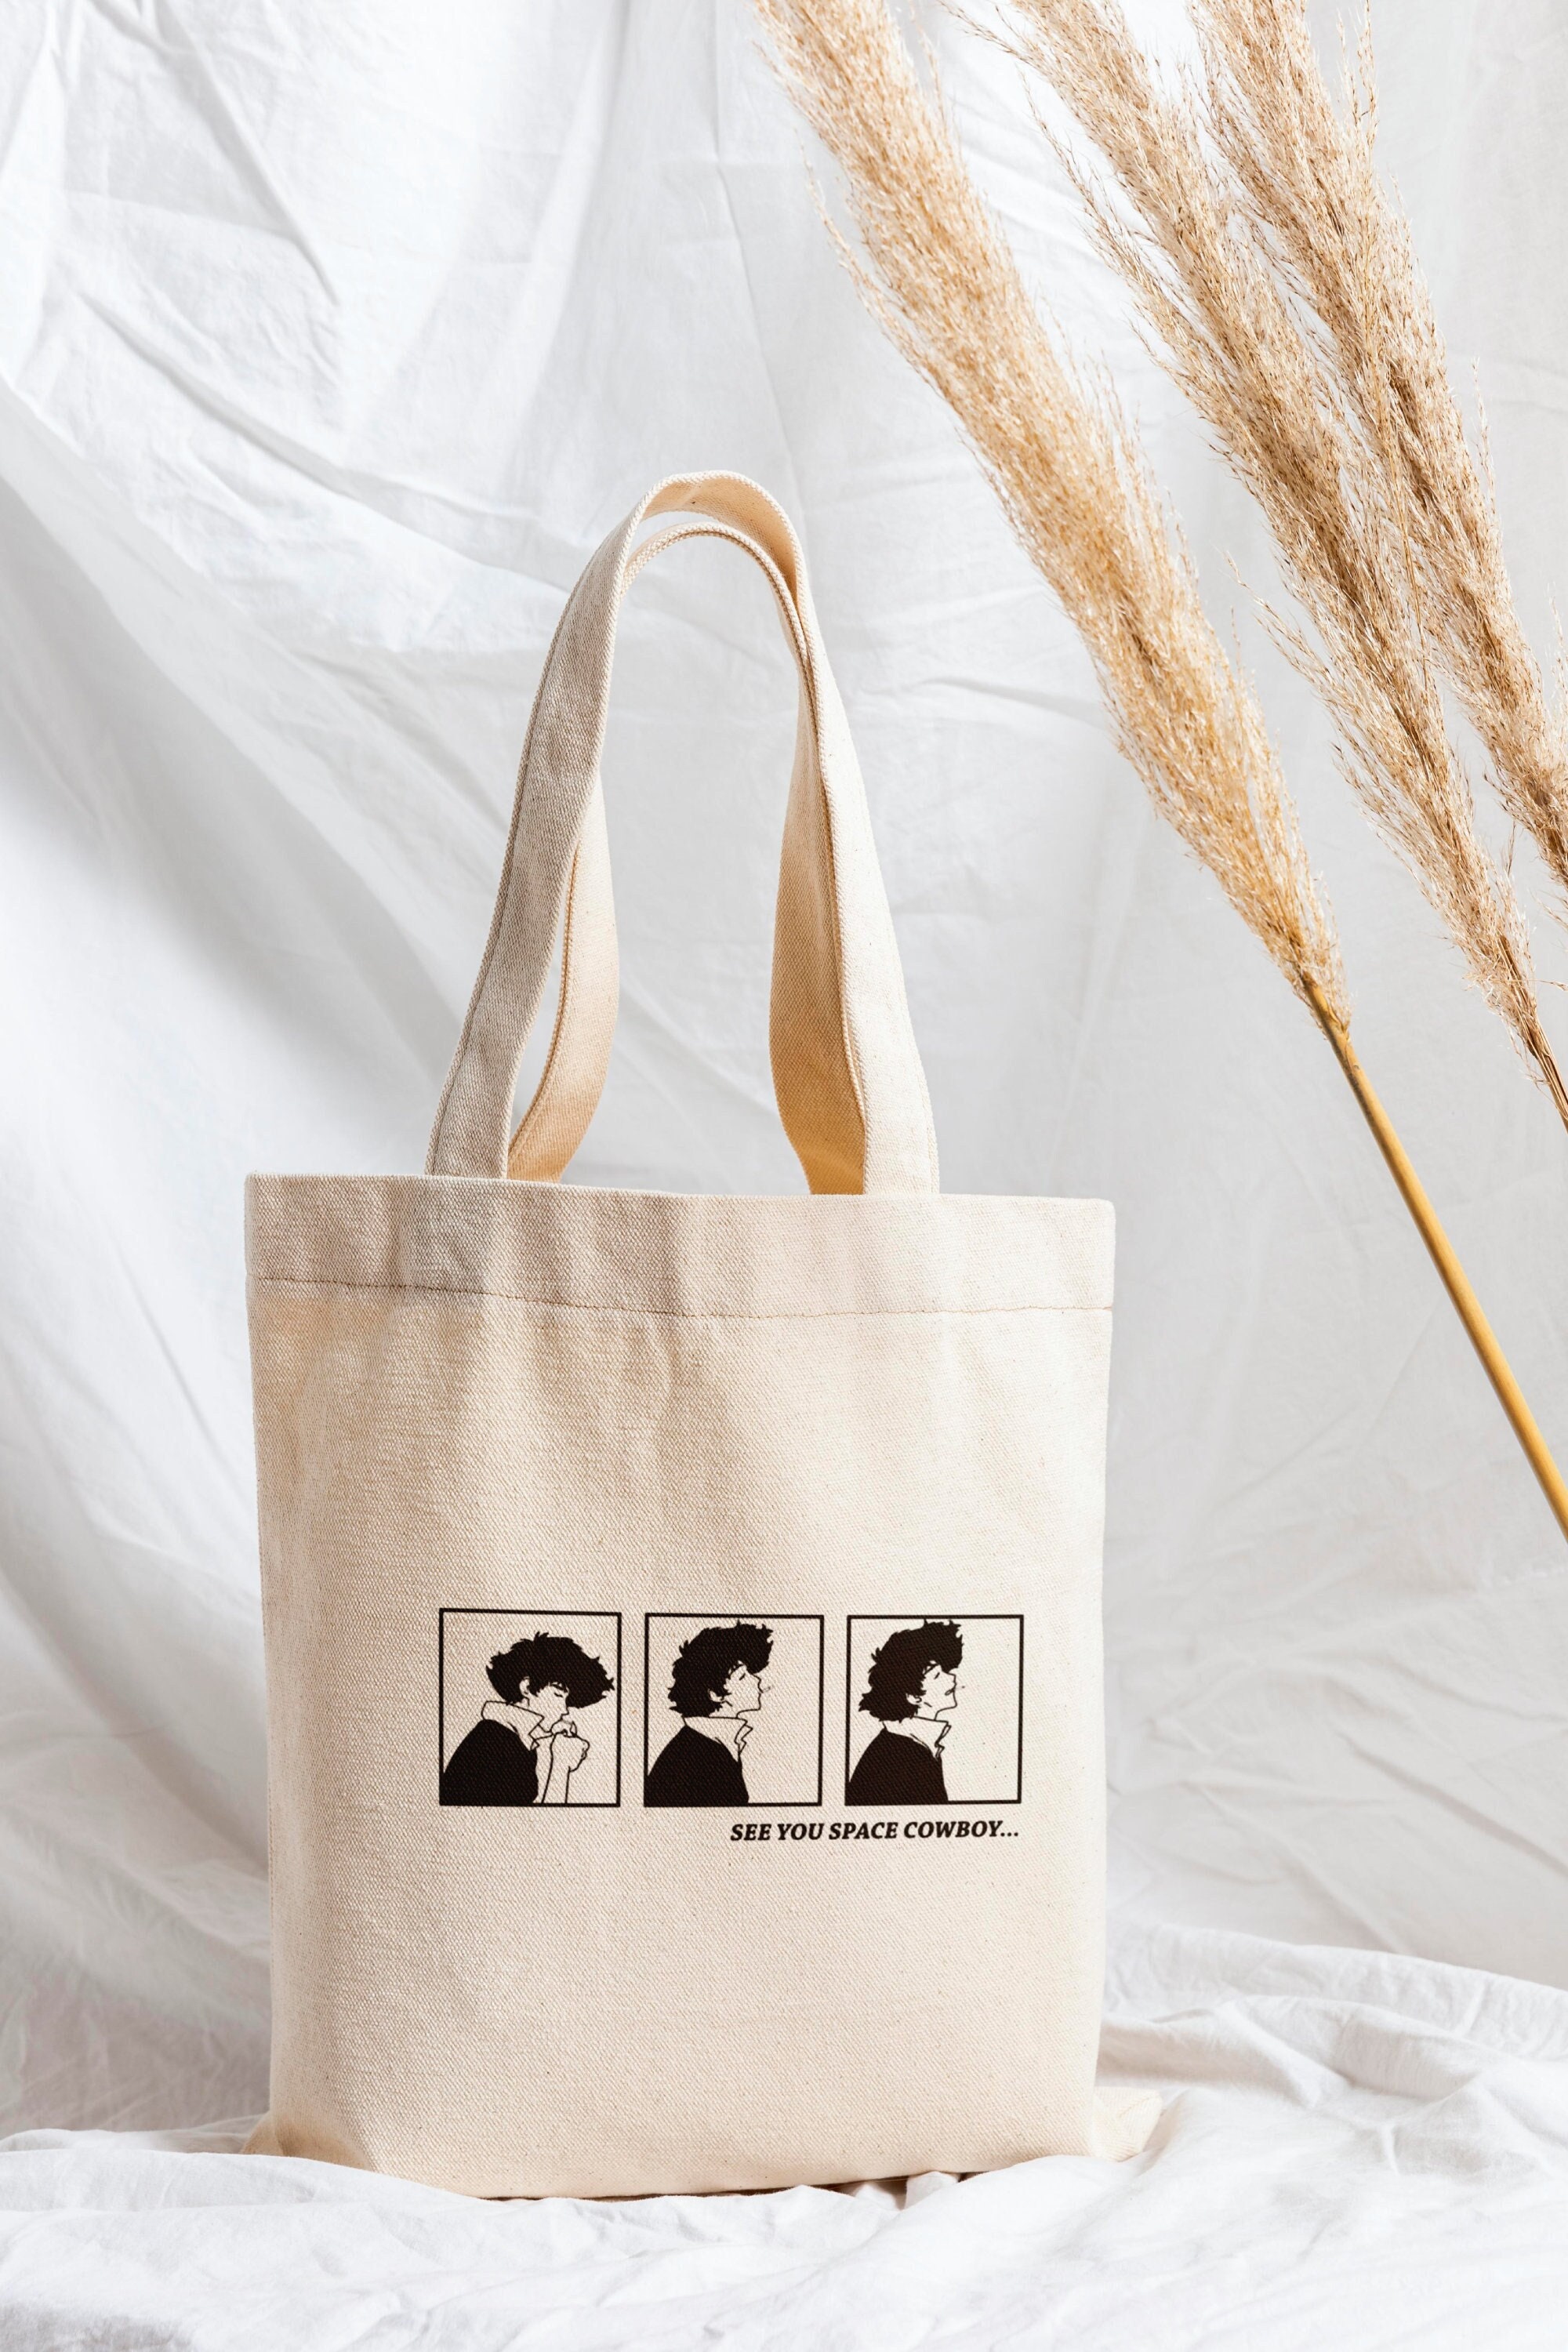 See You Space Cowboy Tote Bag, Anime Tote Bag, Canvas Tote Bag - Etsy